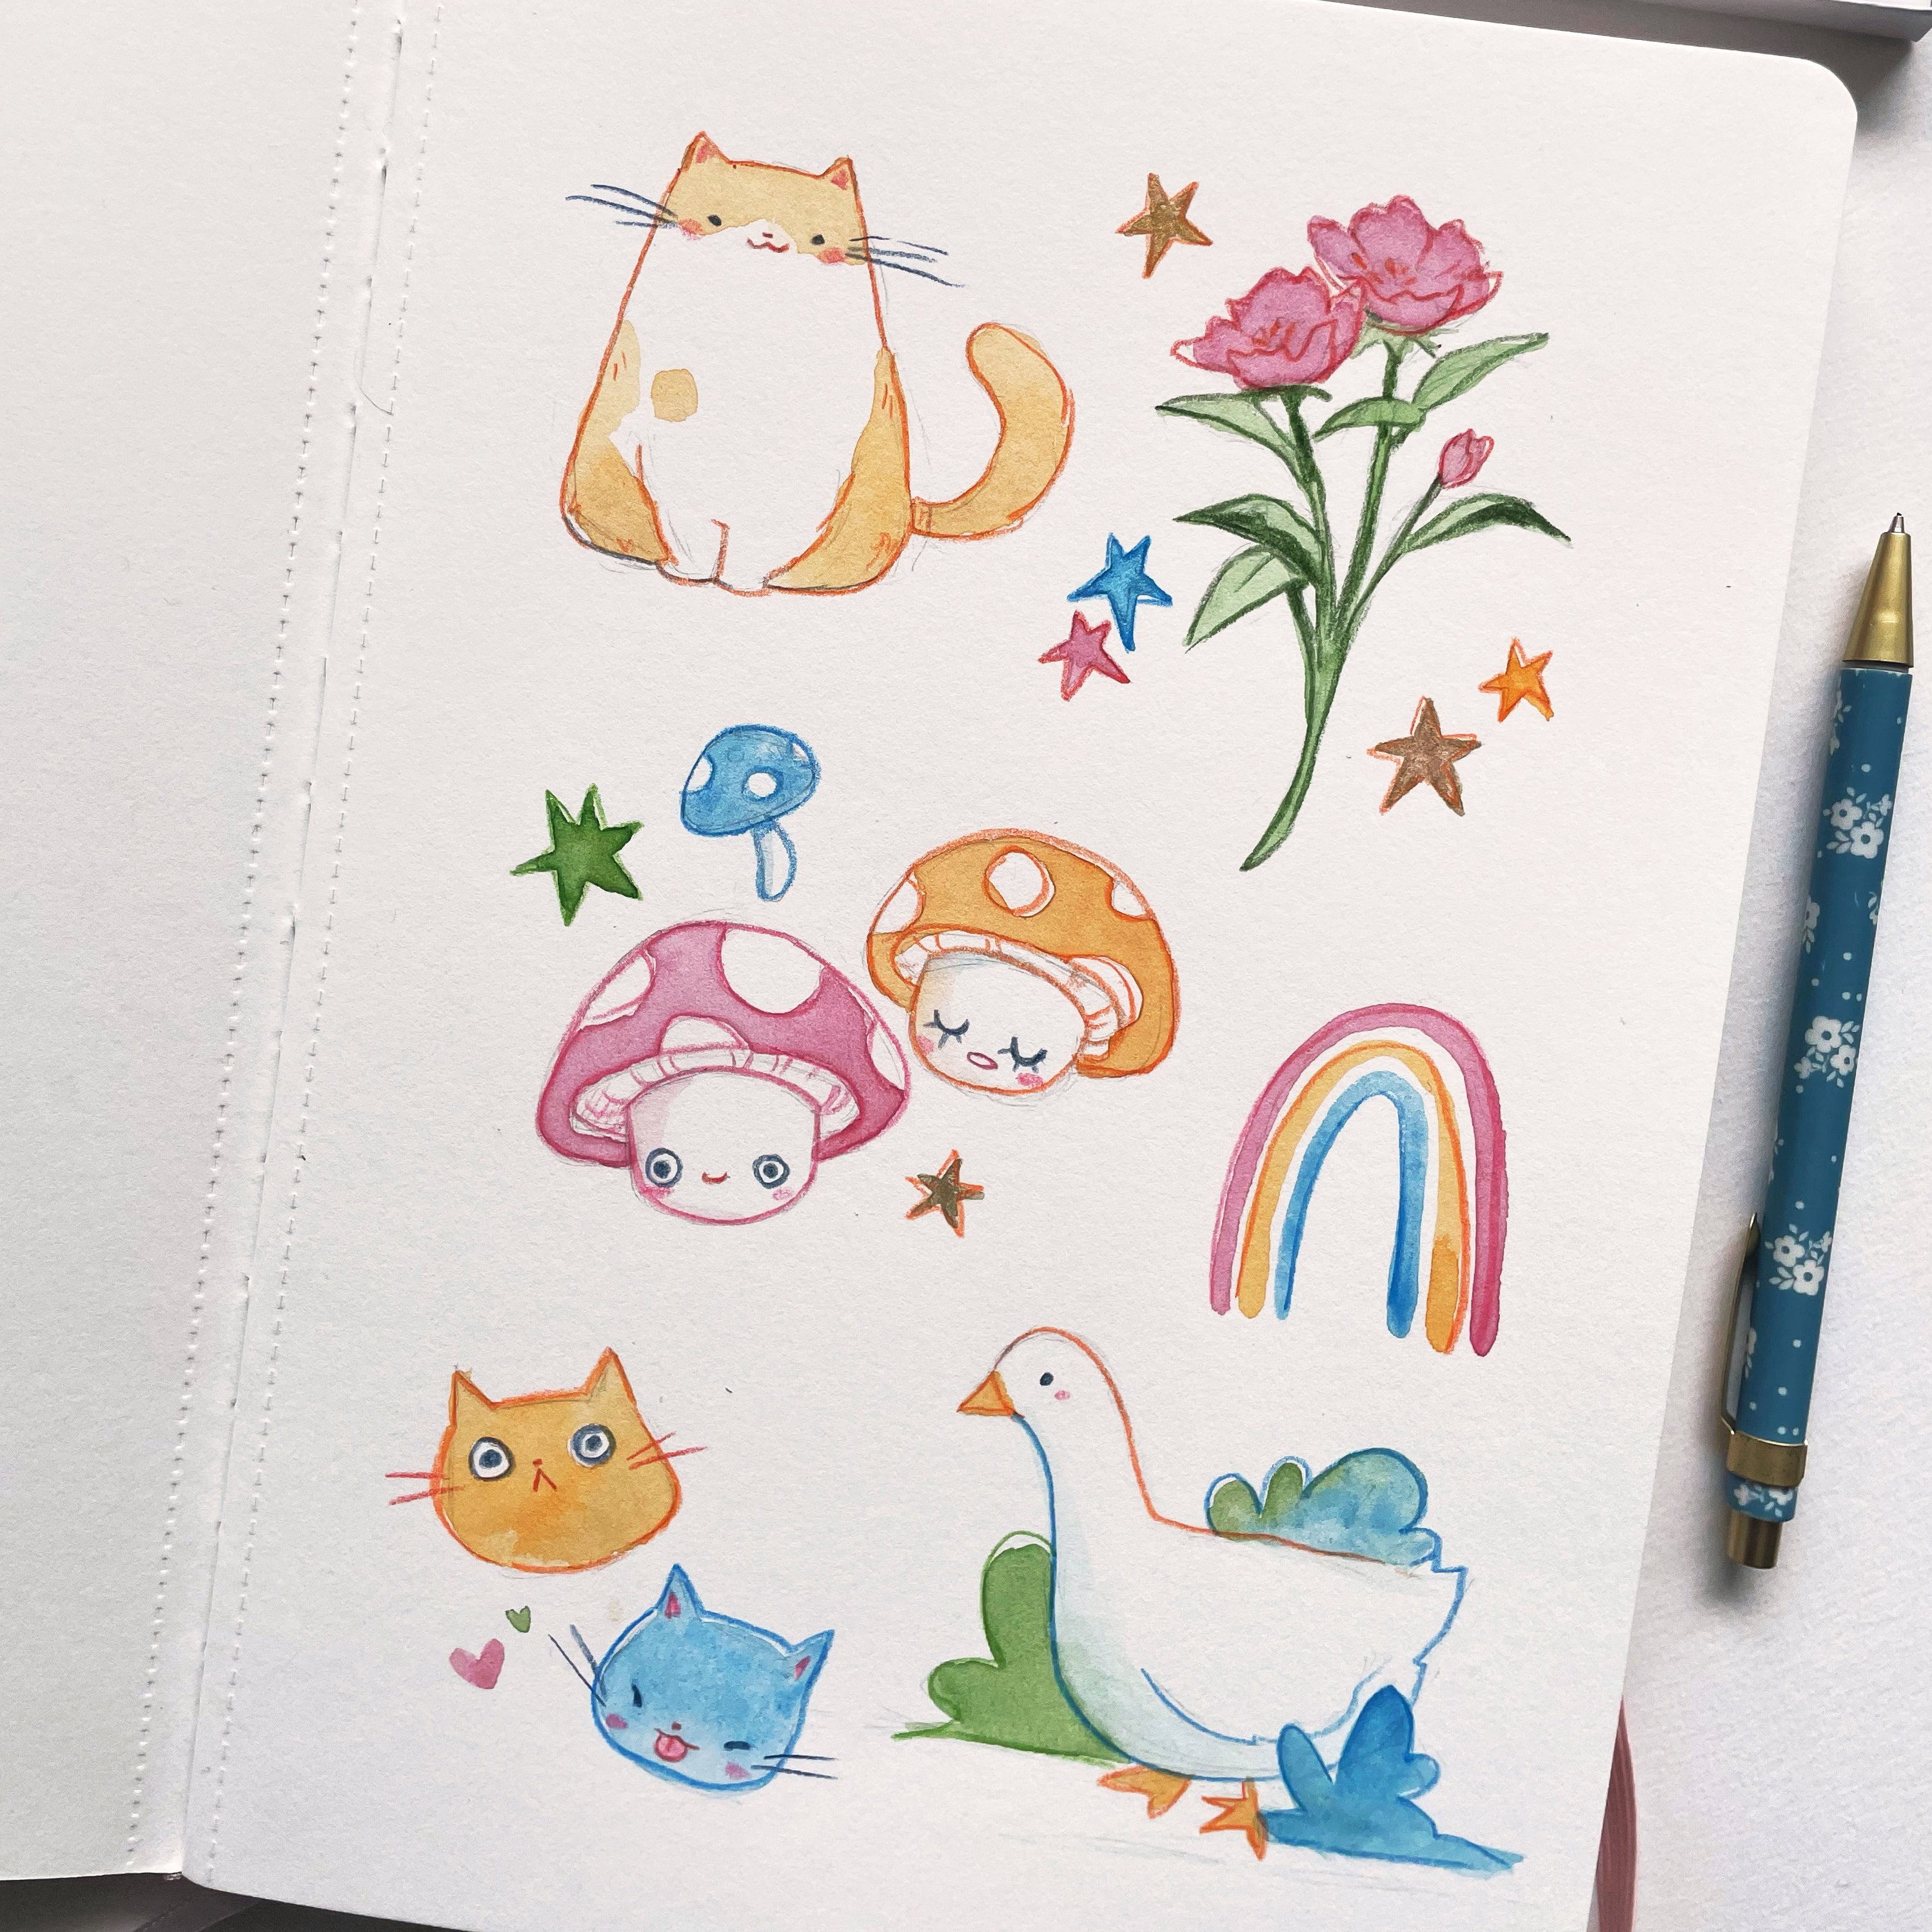 Sketchbook - How To Draw Kawaii Doodles by Hello Cute Doodles